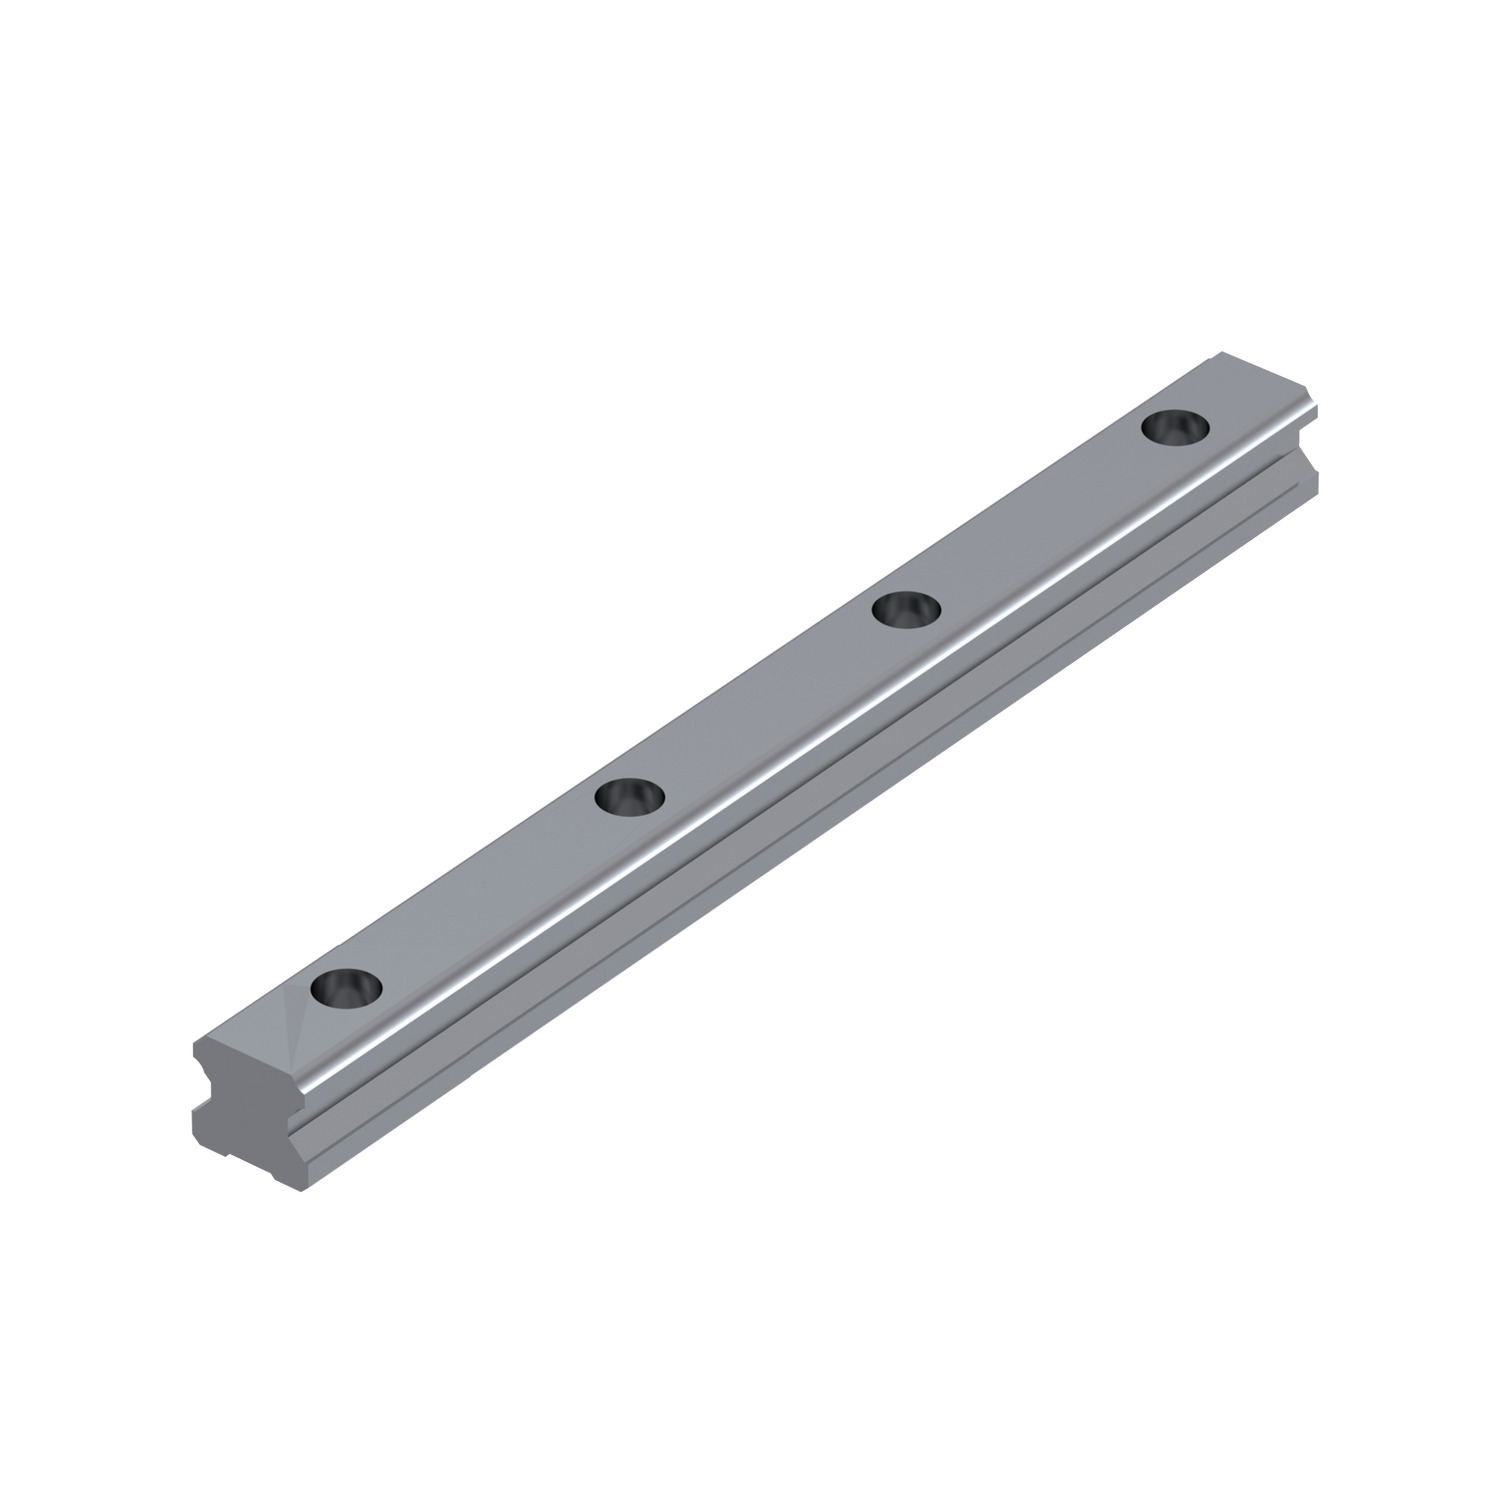 L1016.25-0160 Linear guide rail 25mm 160 Hardened and ground steel. EC:20163754 WG:05063055289894